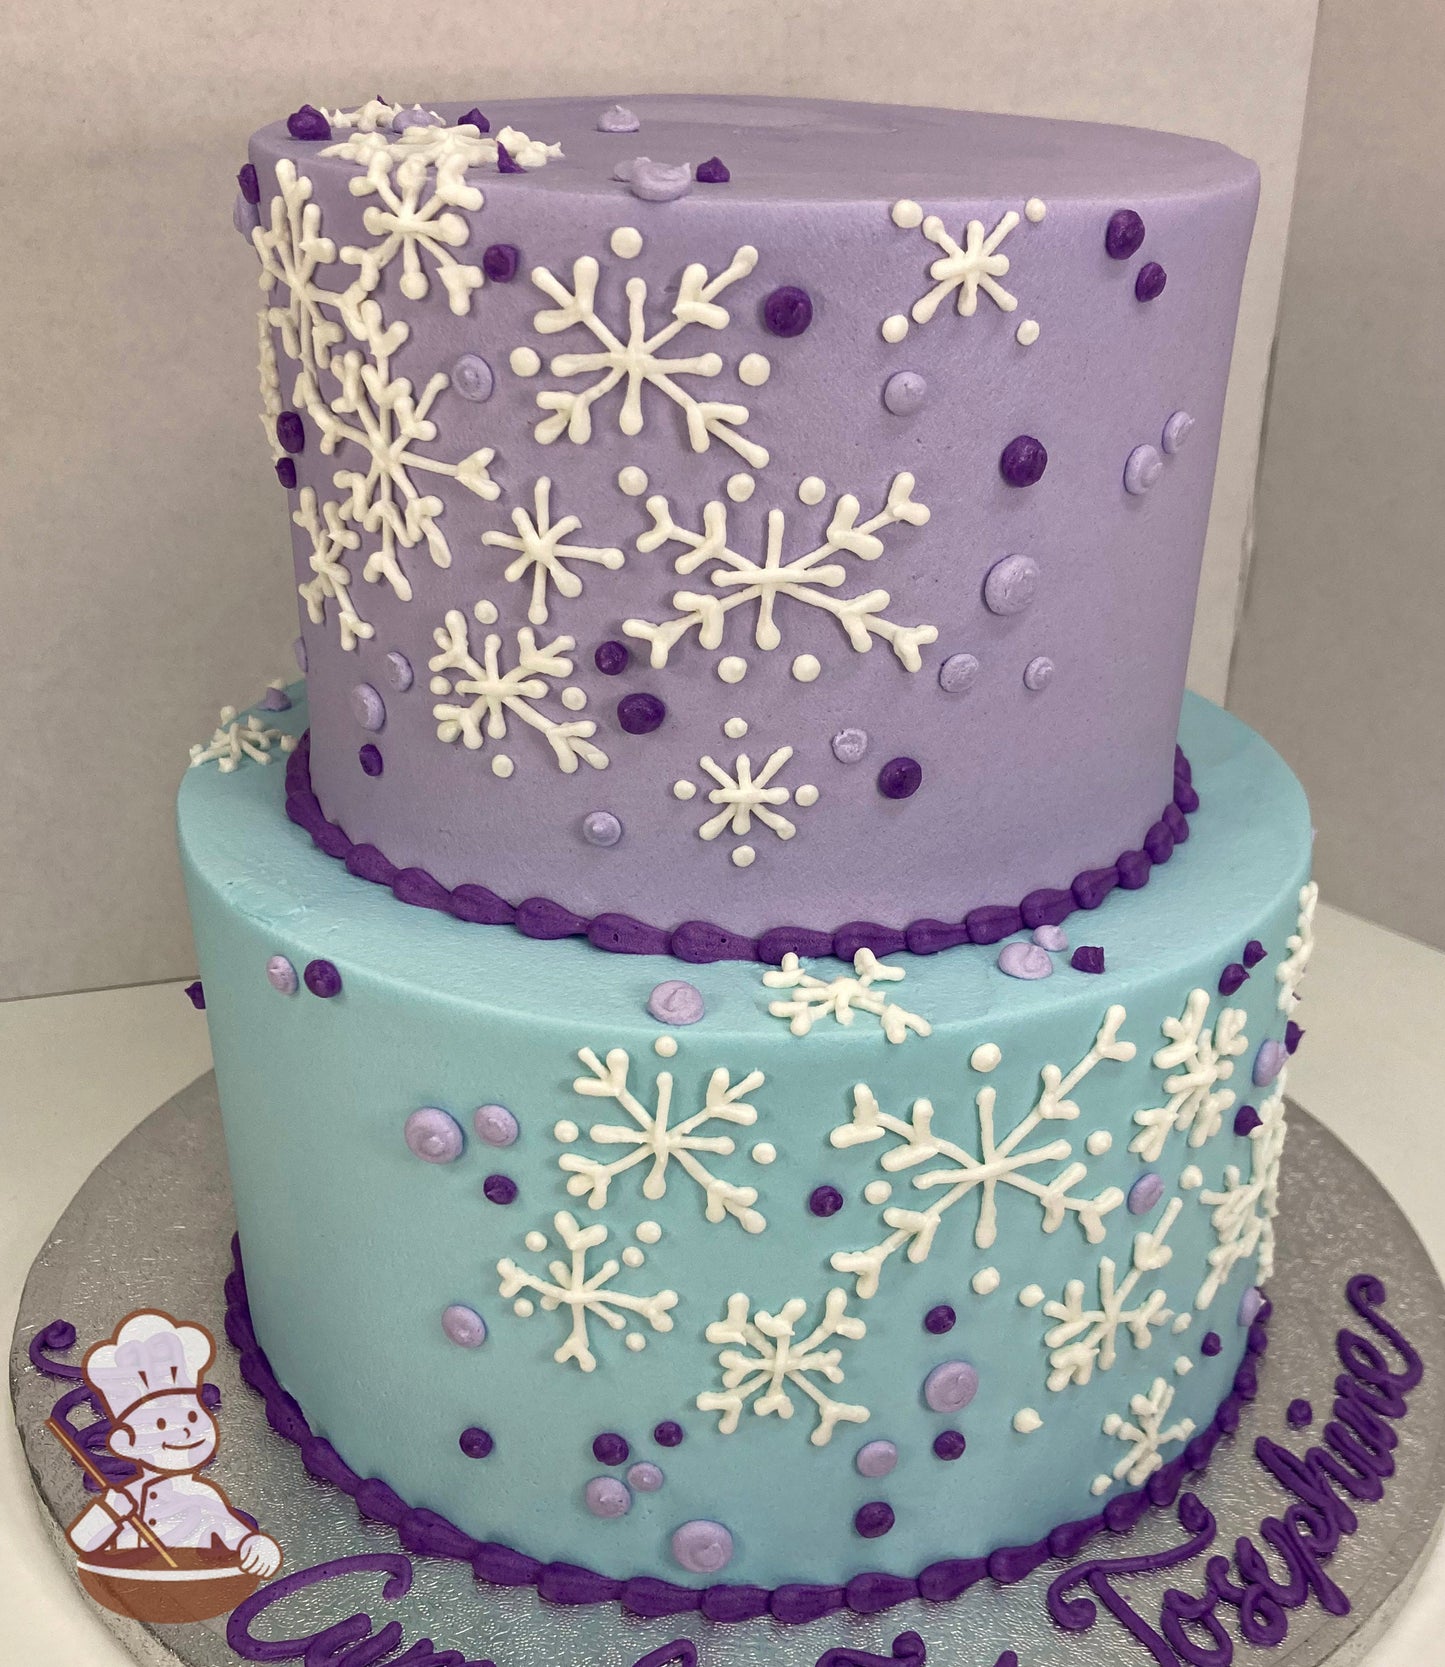 2-tier round cake with light blue icing on bottom tier and lavender icing on top tier with buttercream white snowflakes on cake walls with dots.